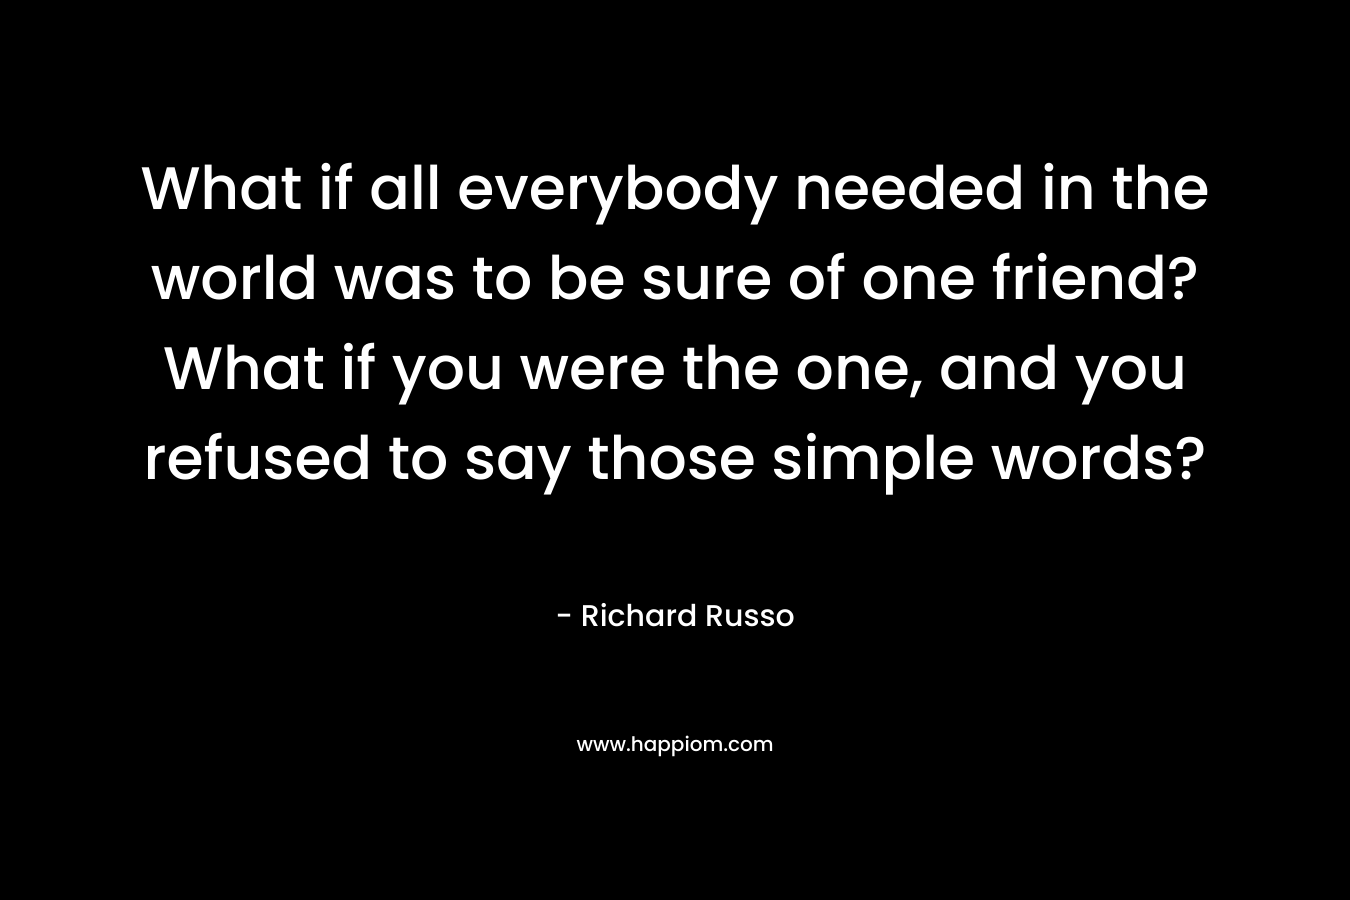 What if all everybody needed in the world was to be sure of one friend? What if you were the one, and you refused to say those simple words? – Richard Russo